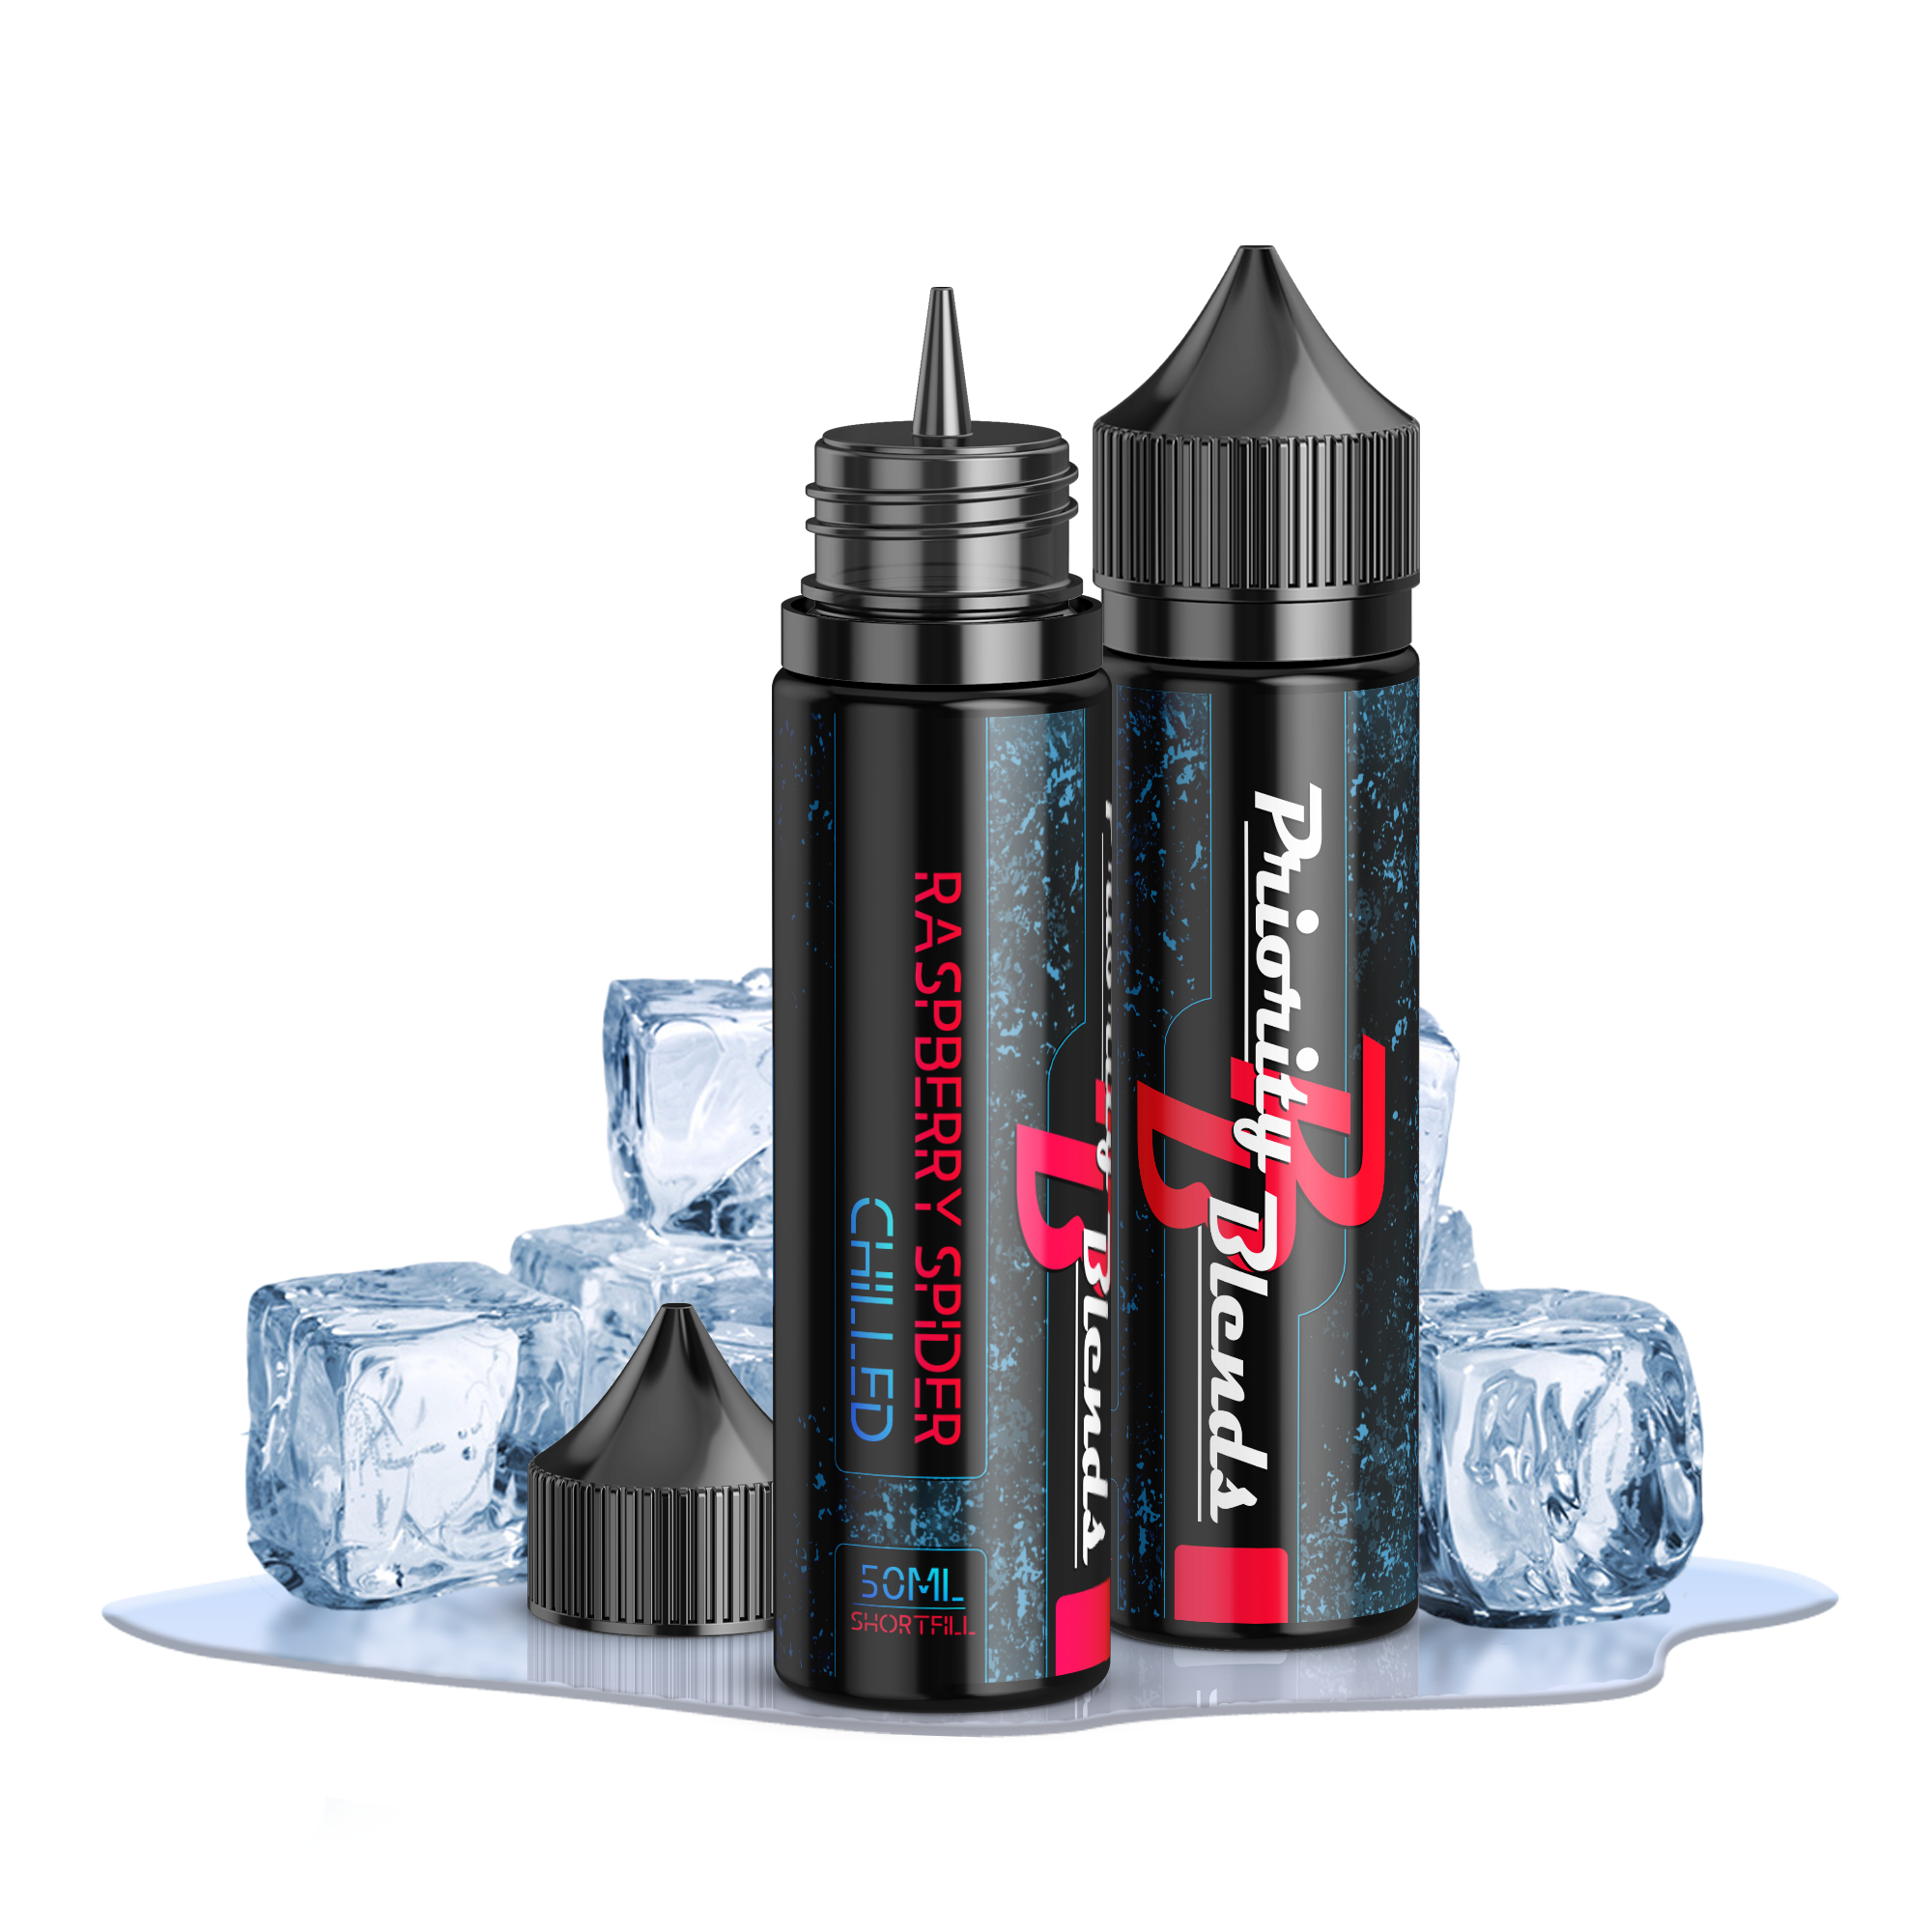 Buy Priority Blends Chilled - Raspberry Spider - Wick And Wire Co Melbourne Vape Shop, Victoria Australia